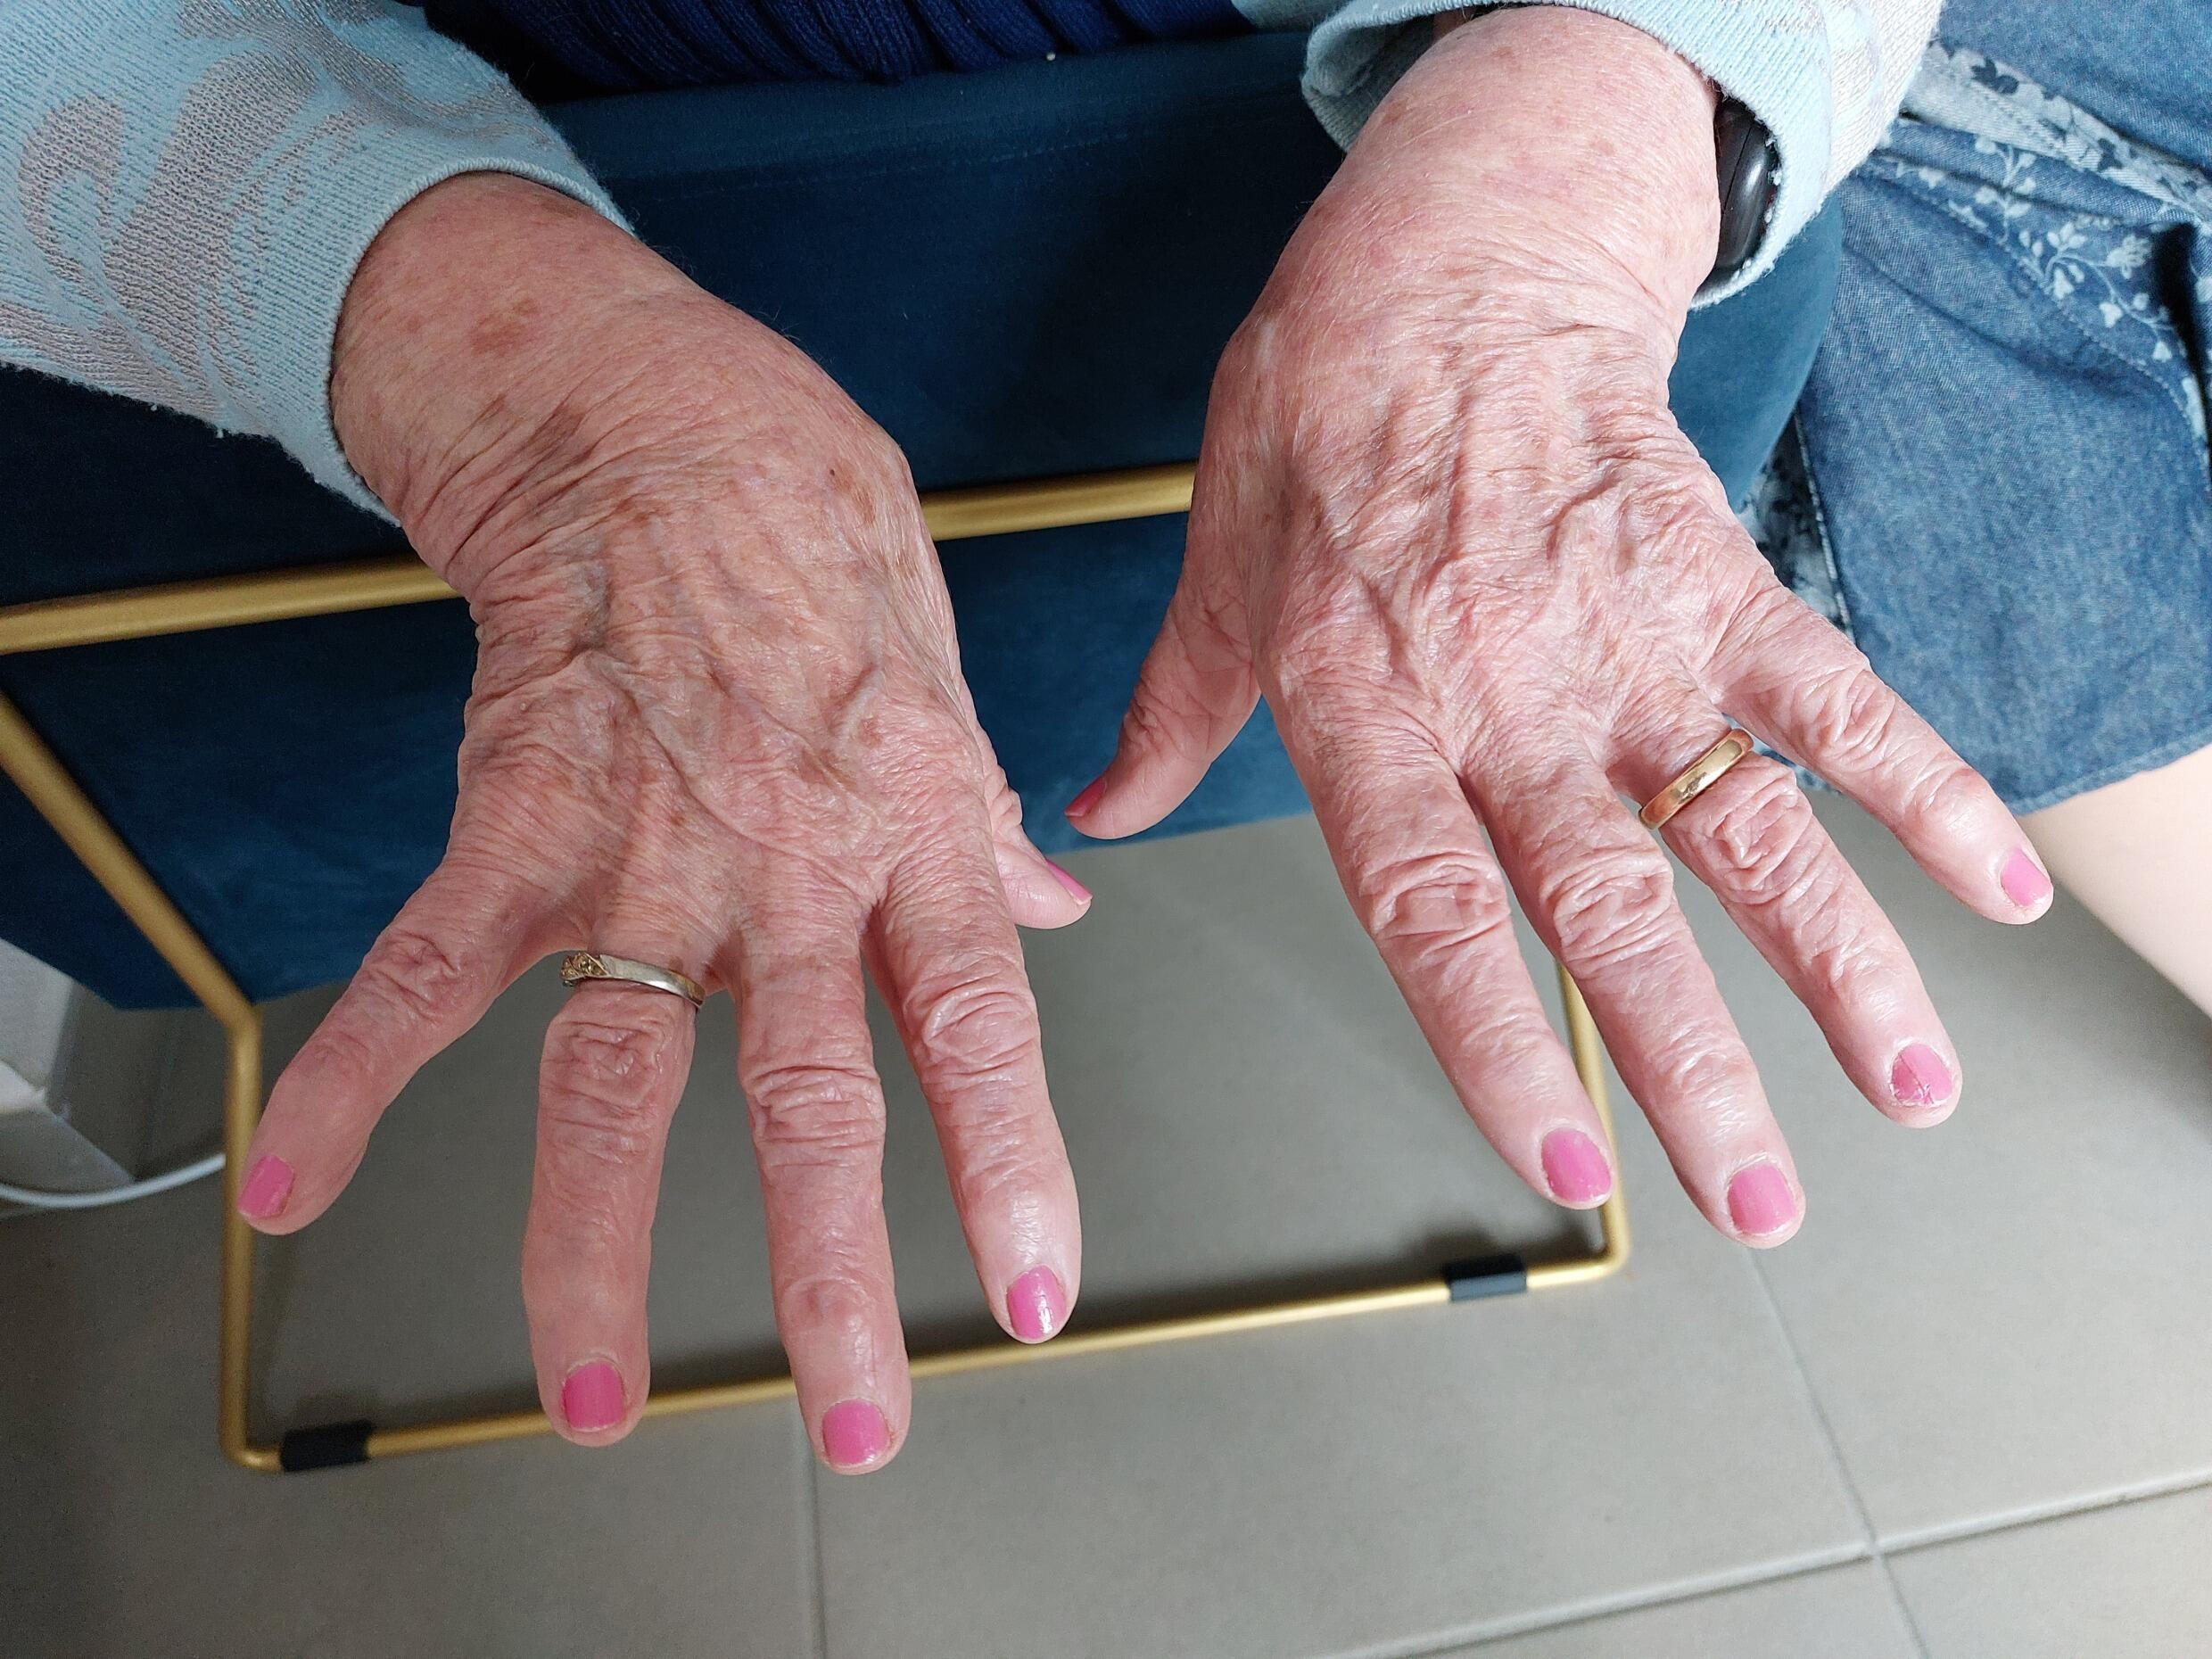 Before joining the house, Odette, a former farmer, had never painted her nails.  “But the attendants at the house take great care,” laughs the nonagenarian.